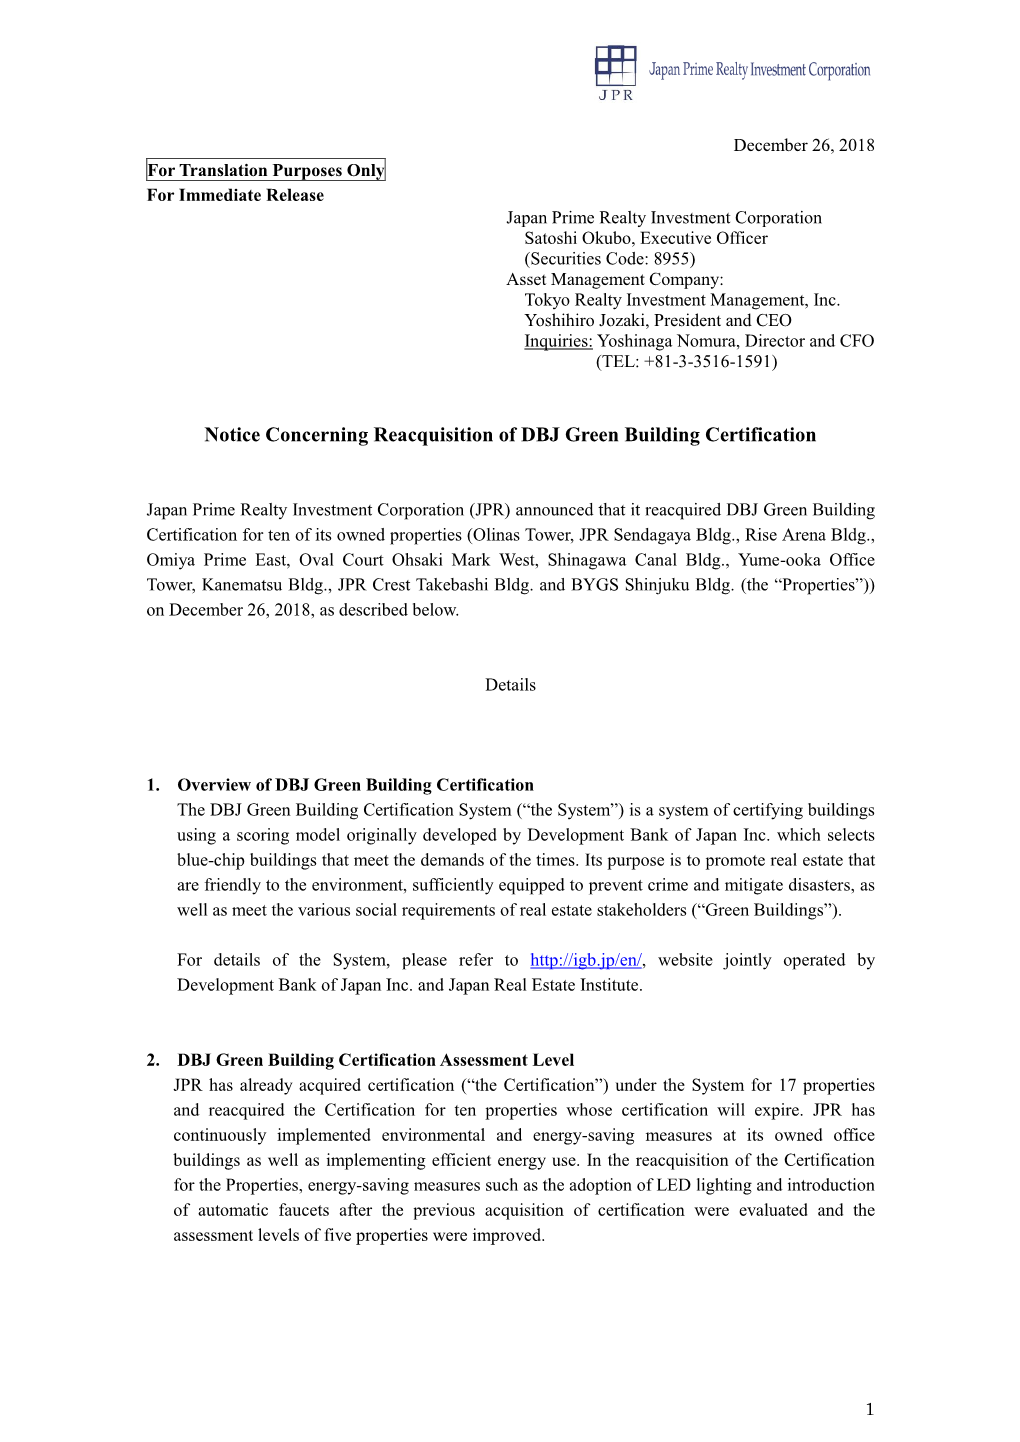 Notice Concerning Reacquisition of DBJ Green Building Certification